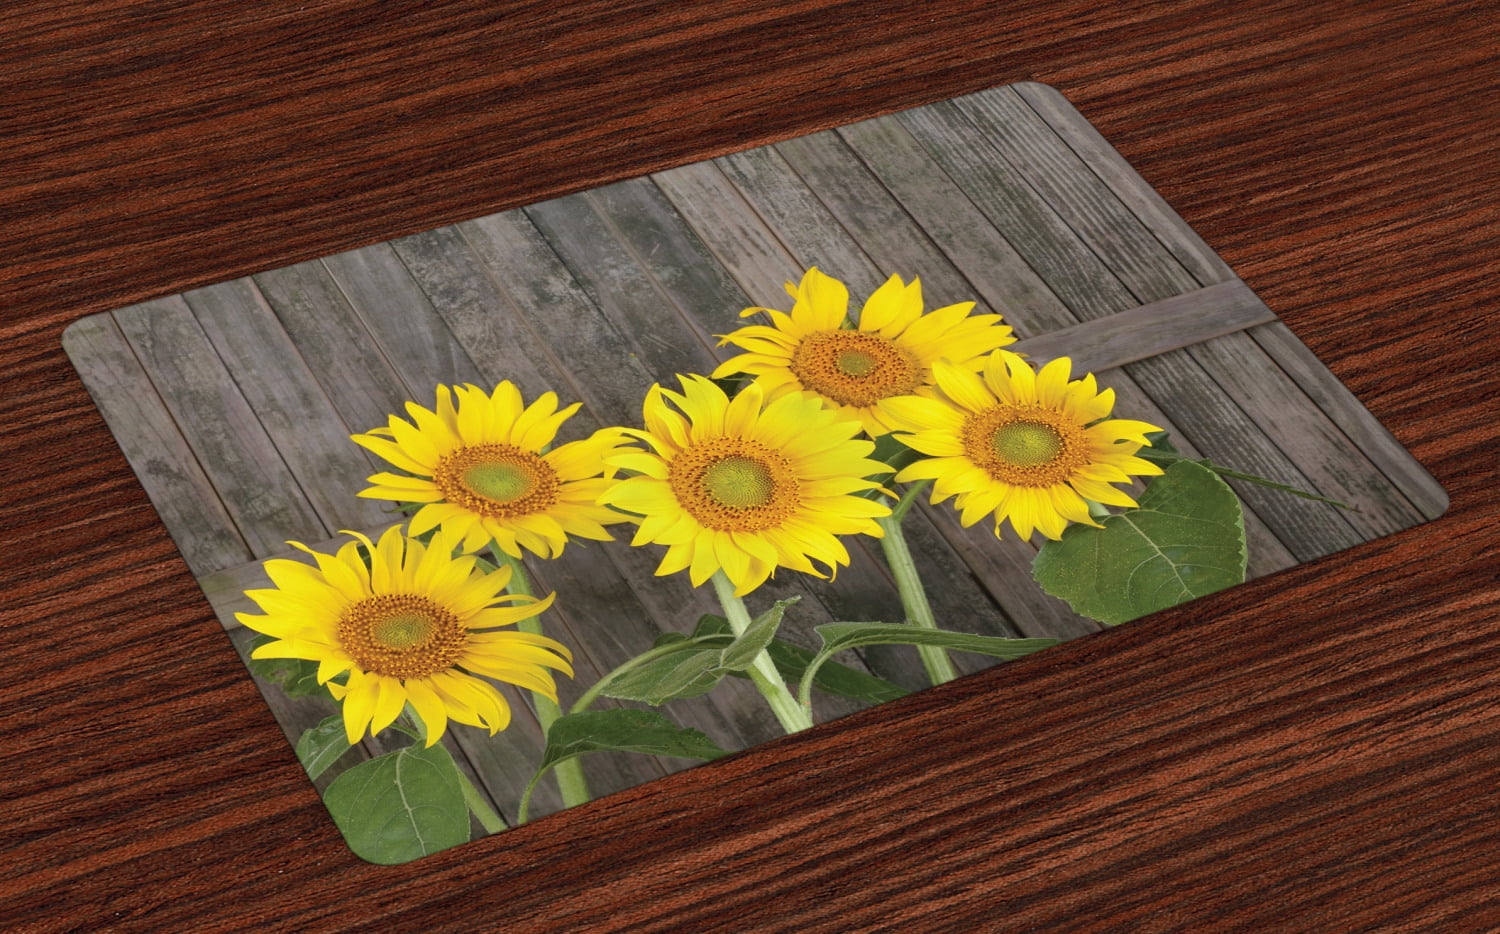 Home Collection dh 72 Inches Long Table Runner Placemats Set of 4 Beautiful Landscape of Yellow Sunflower,Non-Slip Heat-Resistant Table Mat Set for Kitchen Dining Table